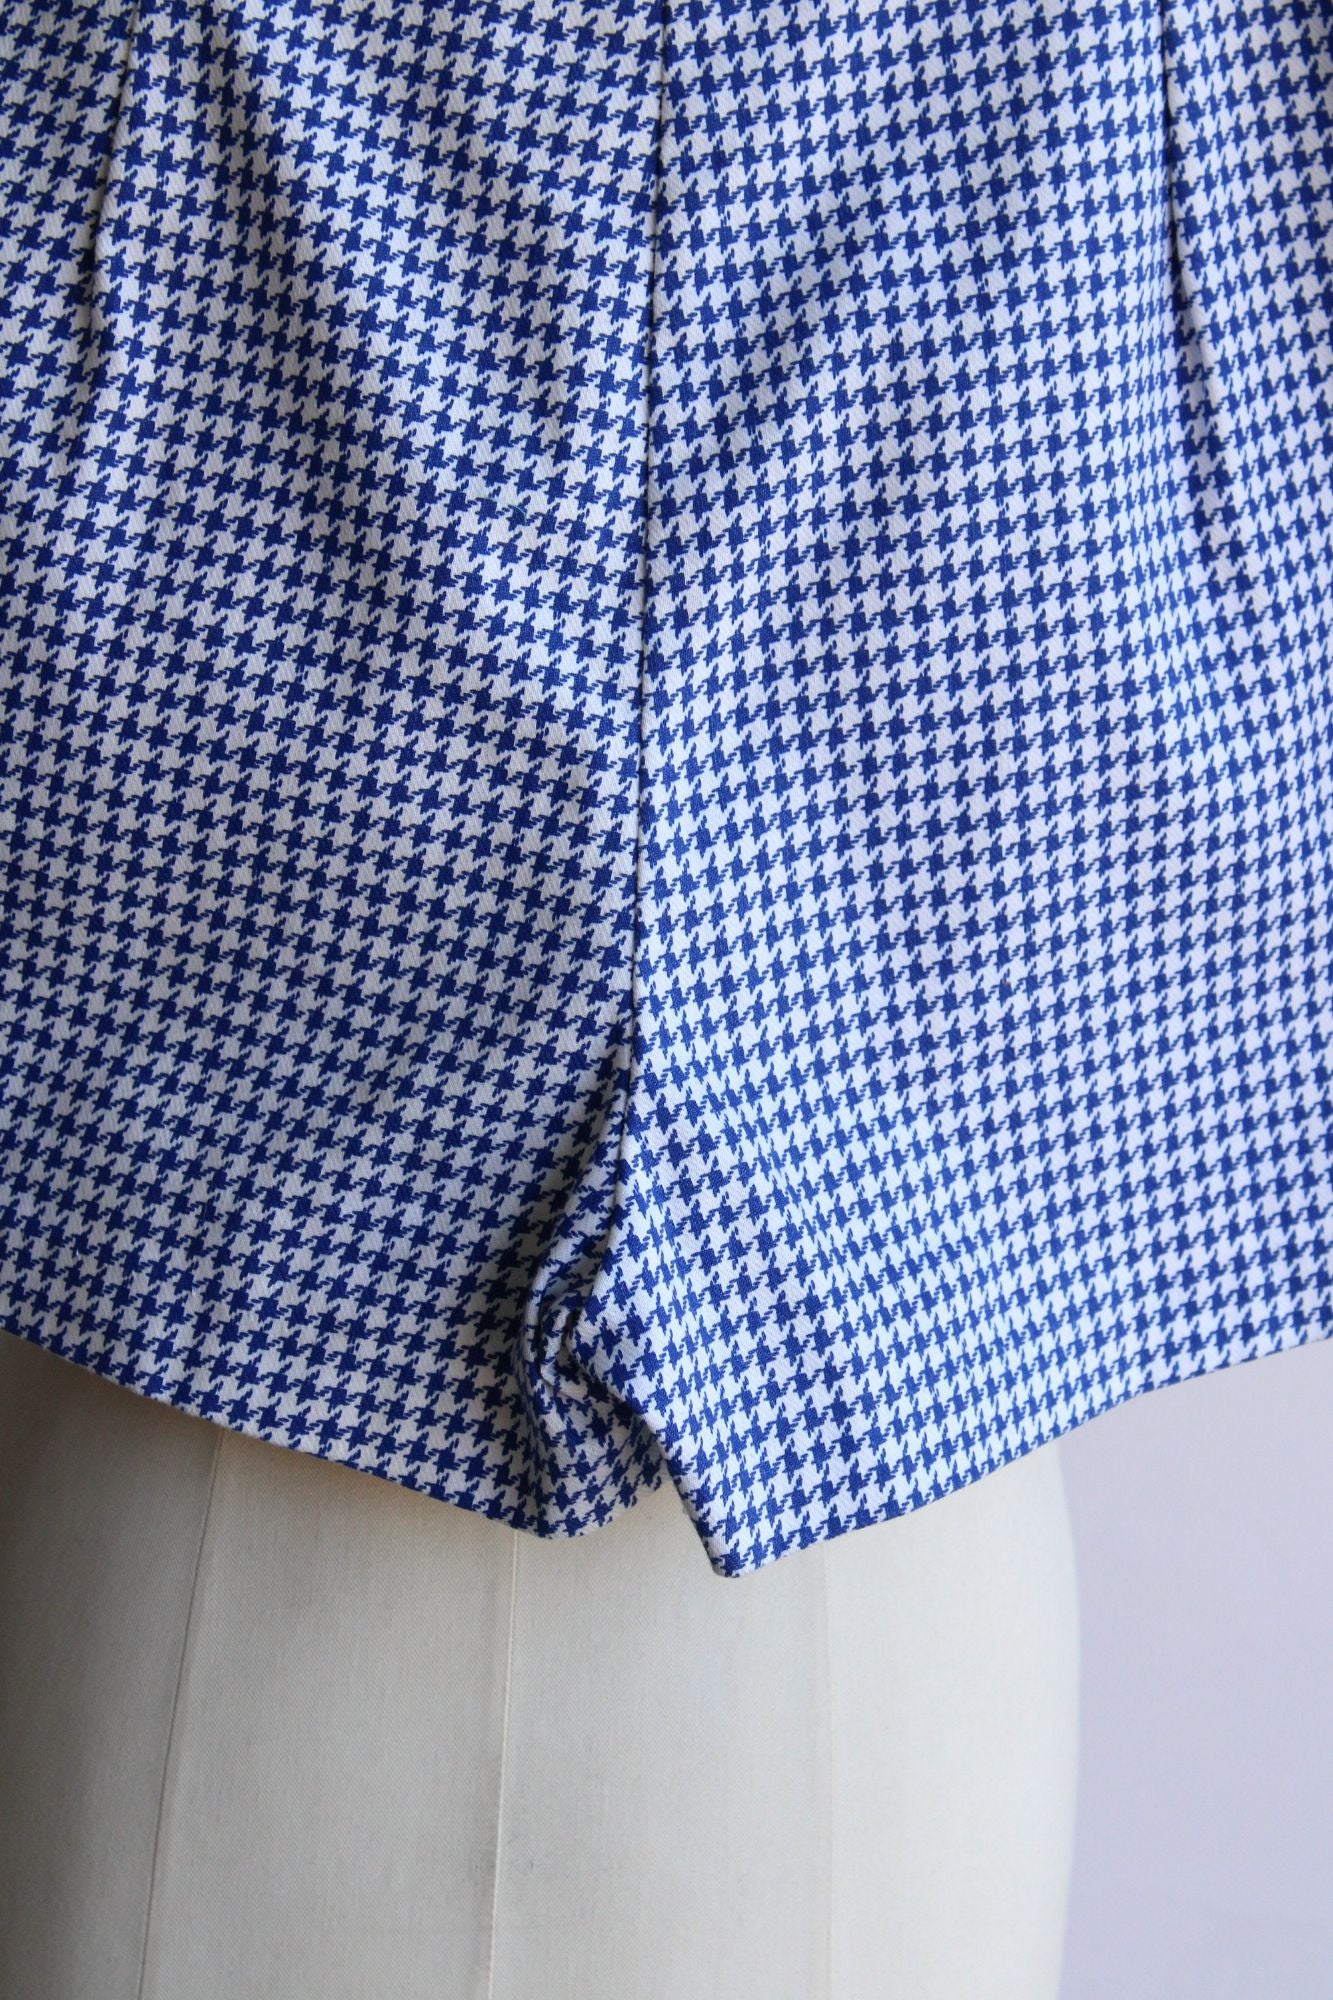 Vintage 1950s 1960s Carol Brown Blue and White Houndstooth Shorts